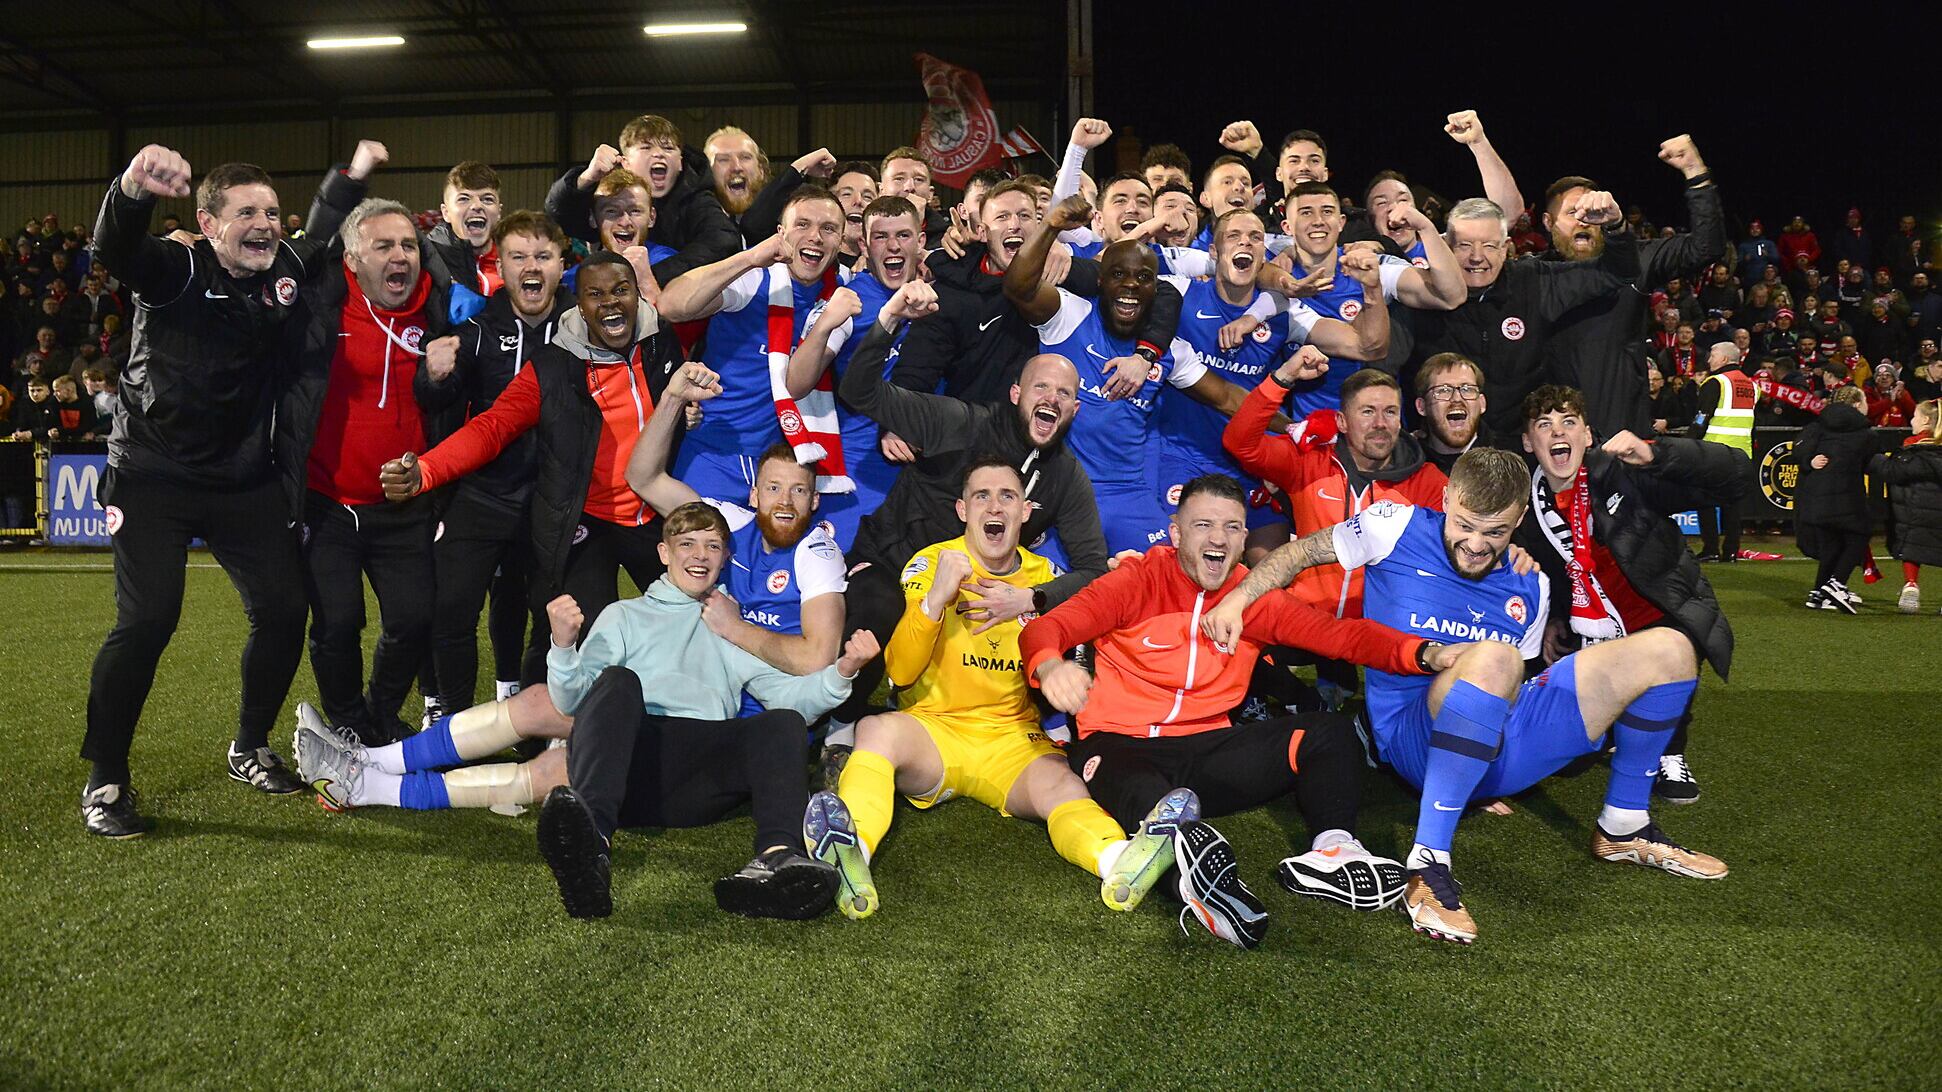 Larne players celebrate after their 2-0 win over Crusaders at Seaview on Friday night, a result which sealed their first Irish League title in their 134-year history  Picture: Pacemaker